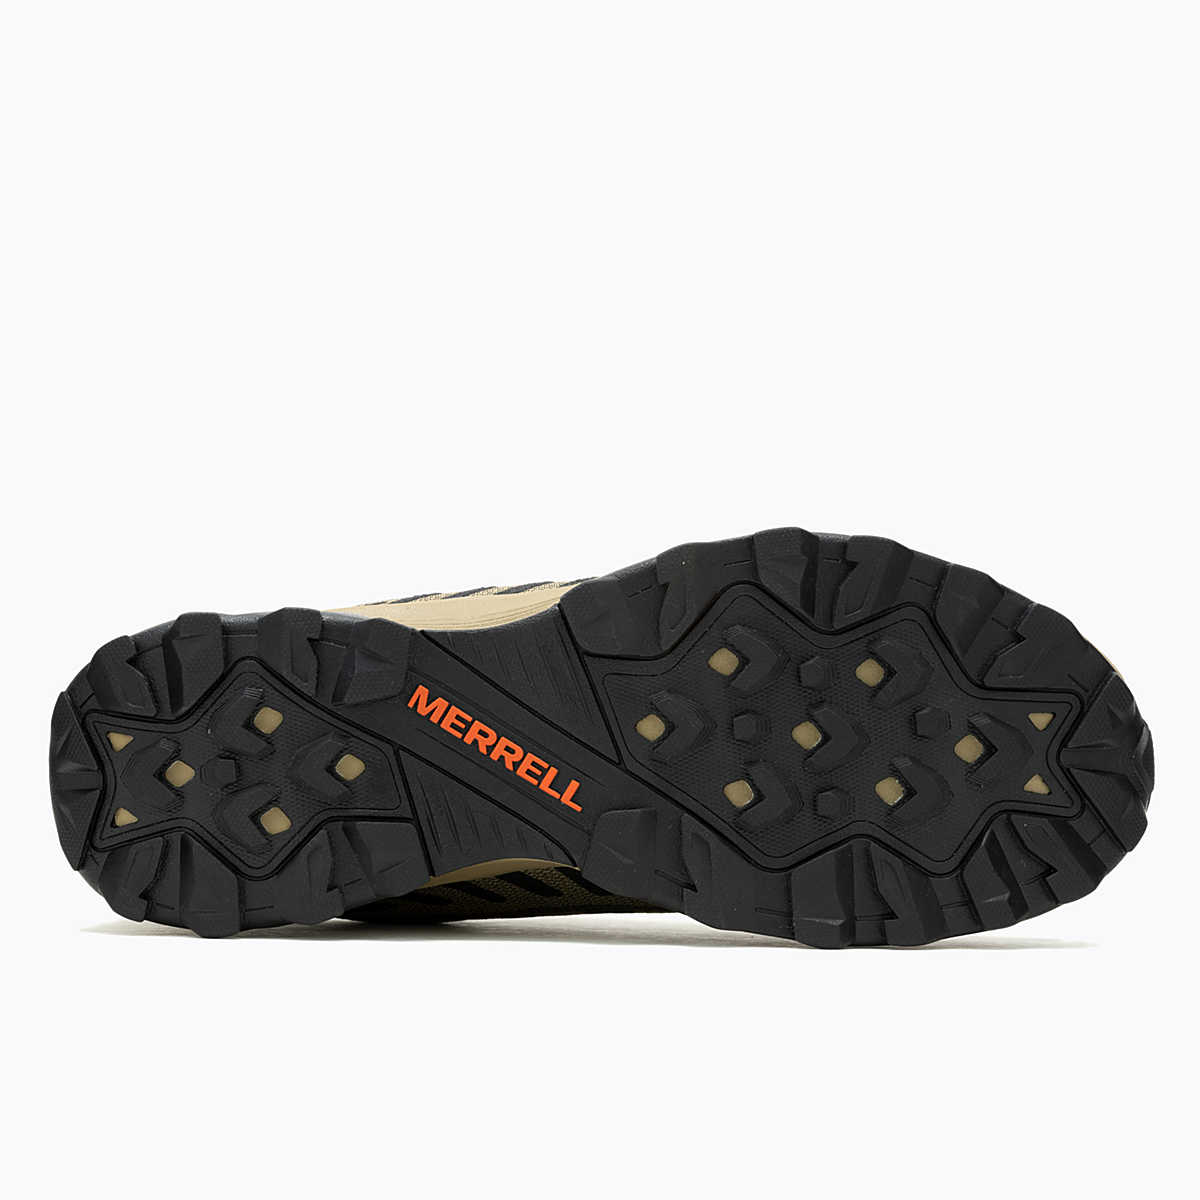 30% Recycled Rubber Outsole - Offers superior traction.